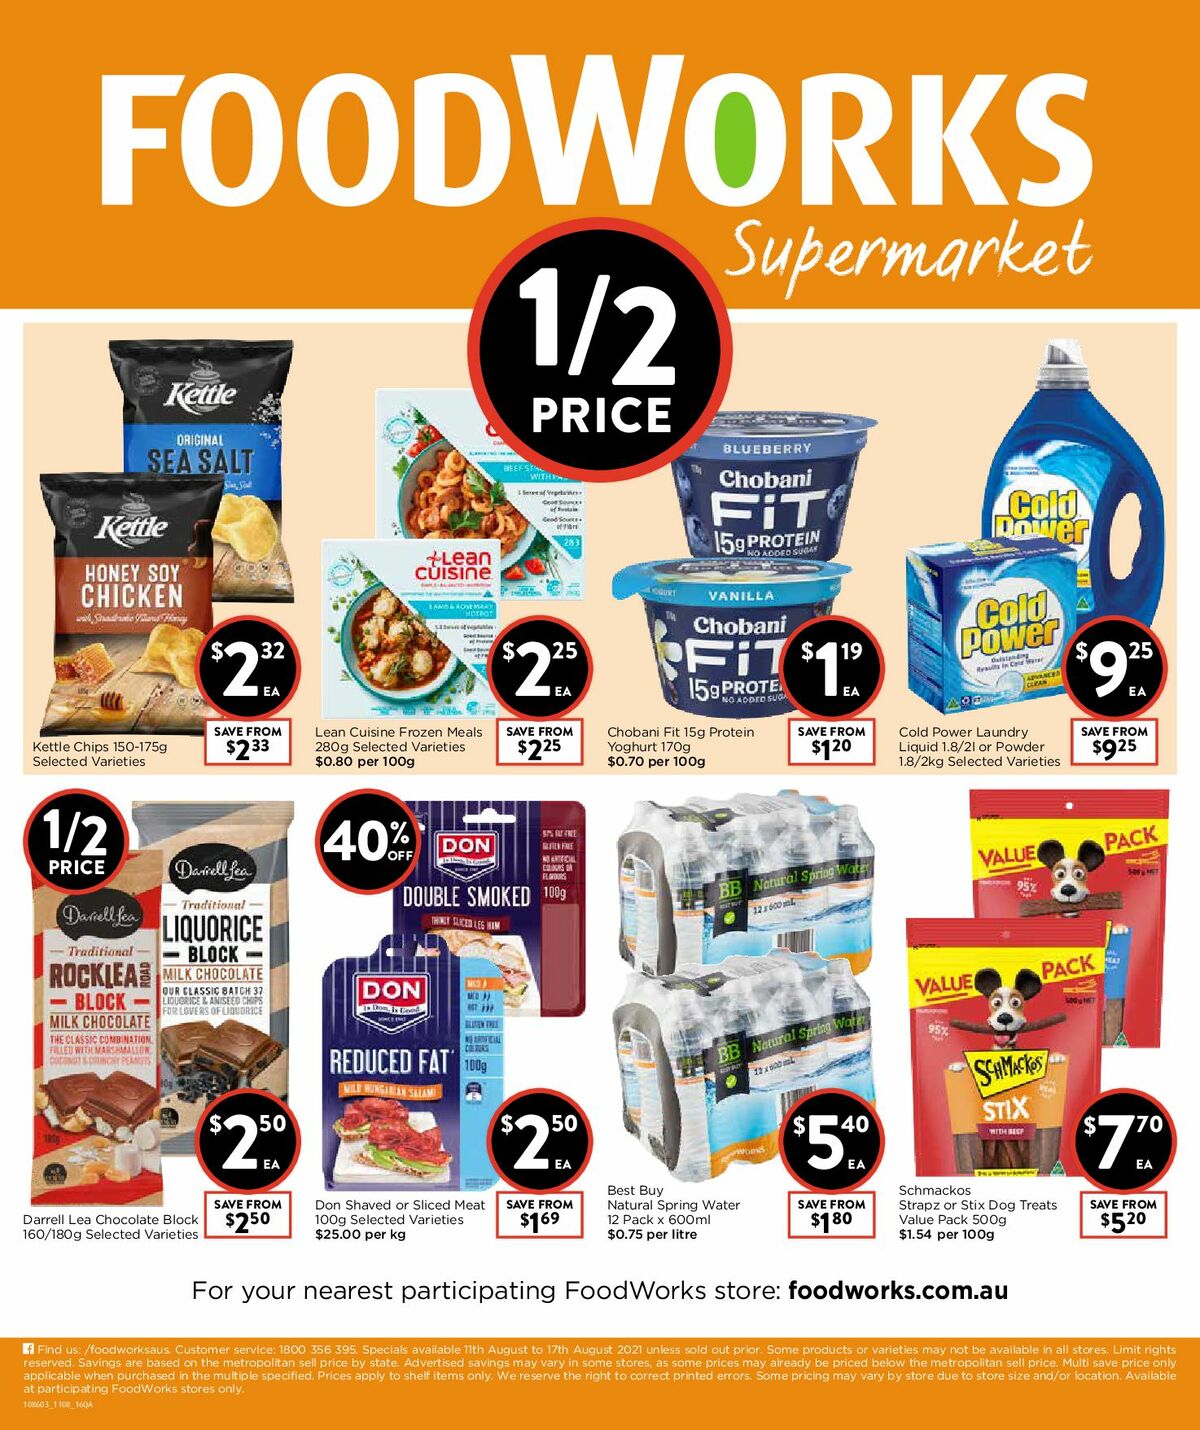 FoodWorks Supermarket Catalogues from 11 August